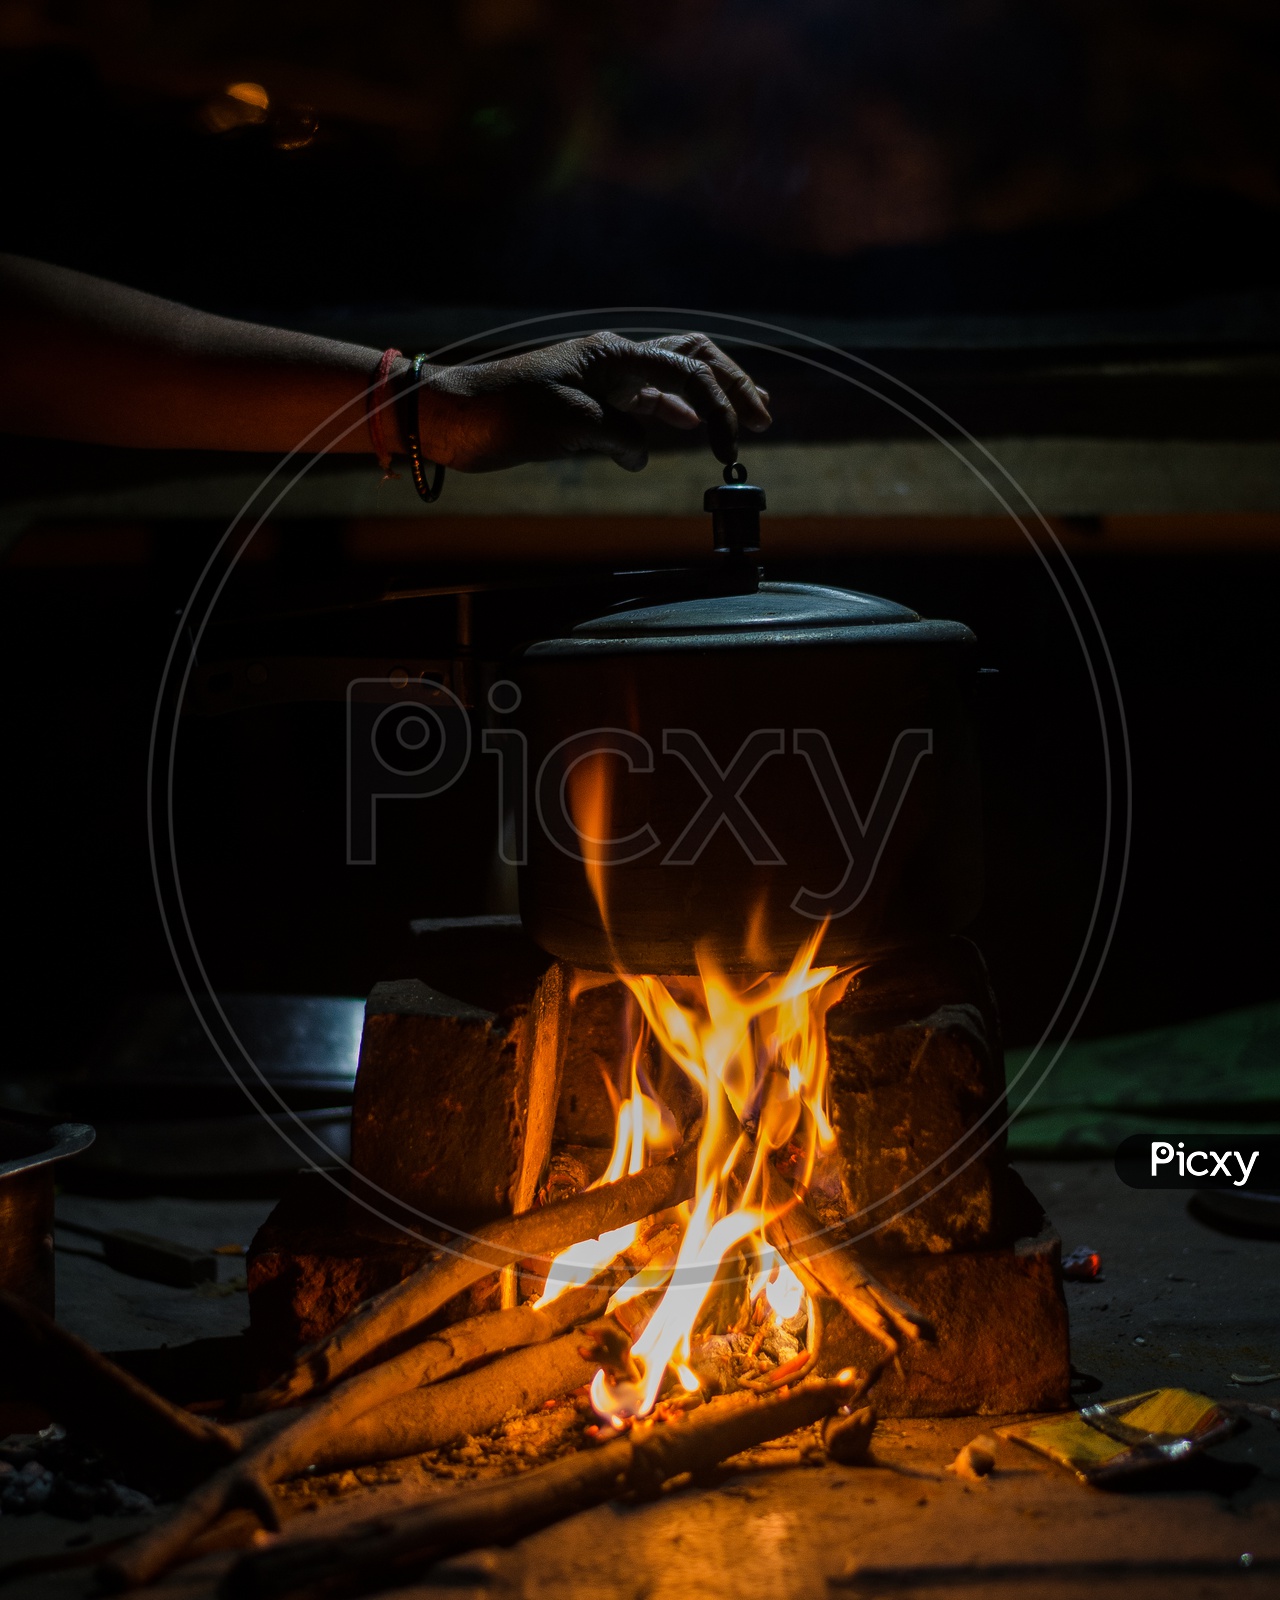 Cooking In a Rice Cooker On a Rural Traditional Stove